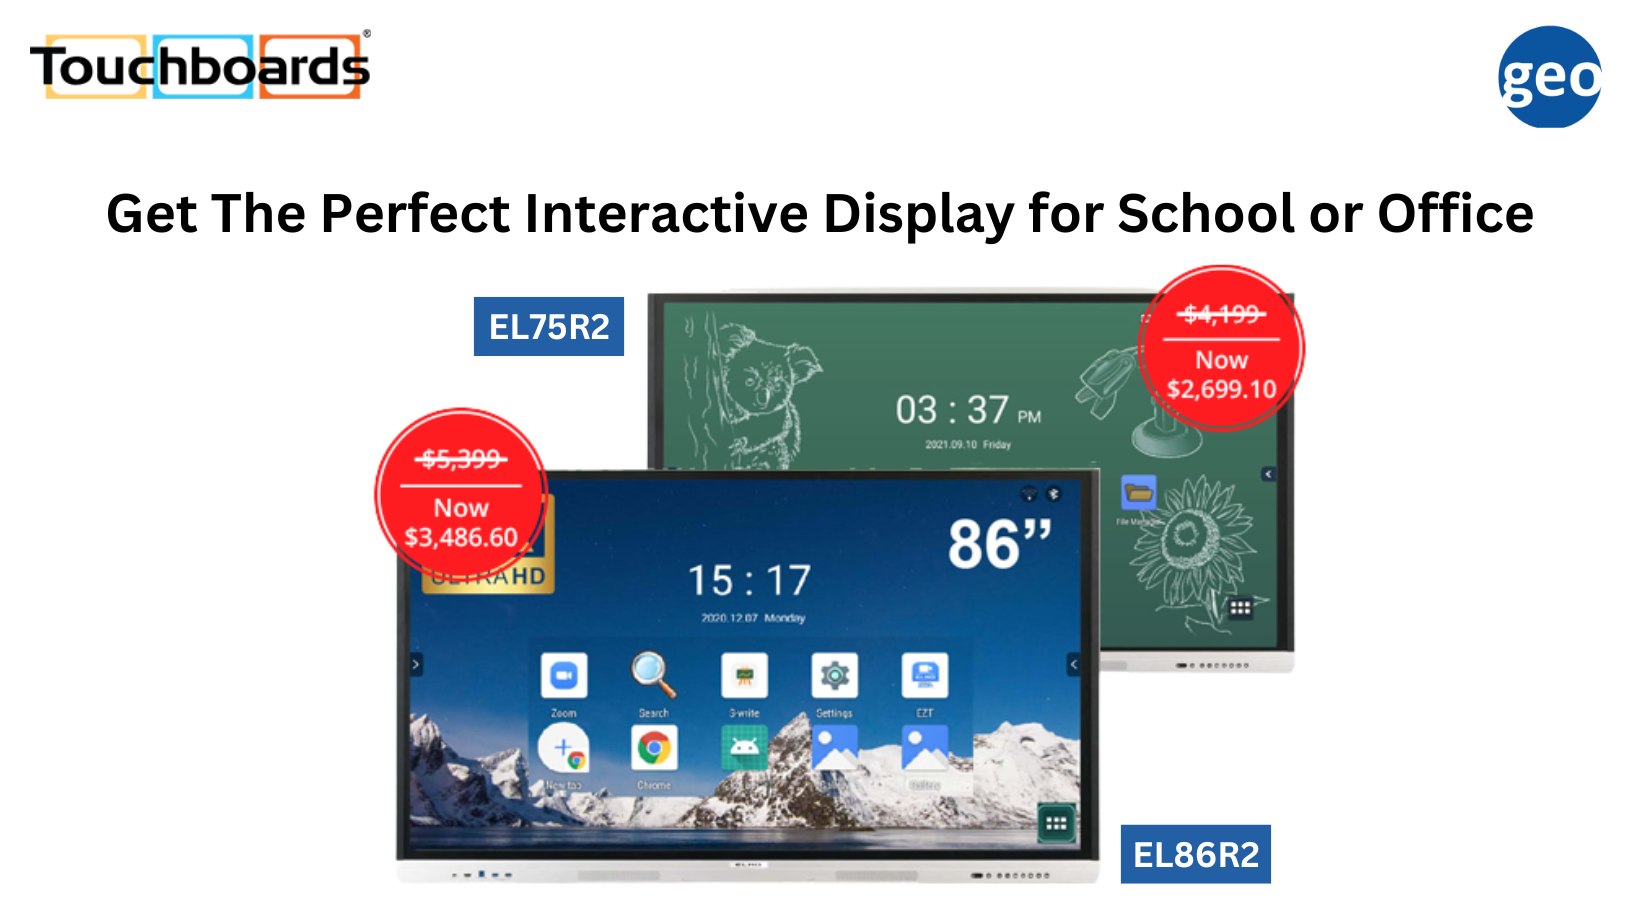 Touchboards: Get The Perfect Interactive Display for School or Office